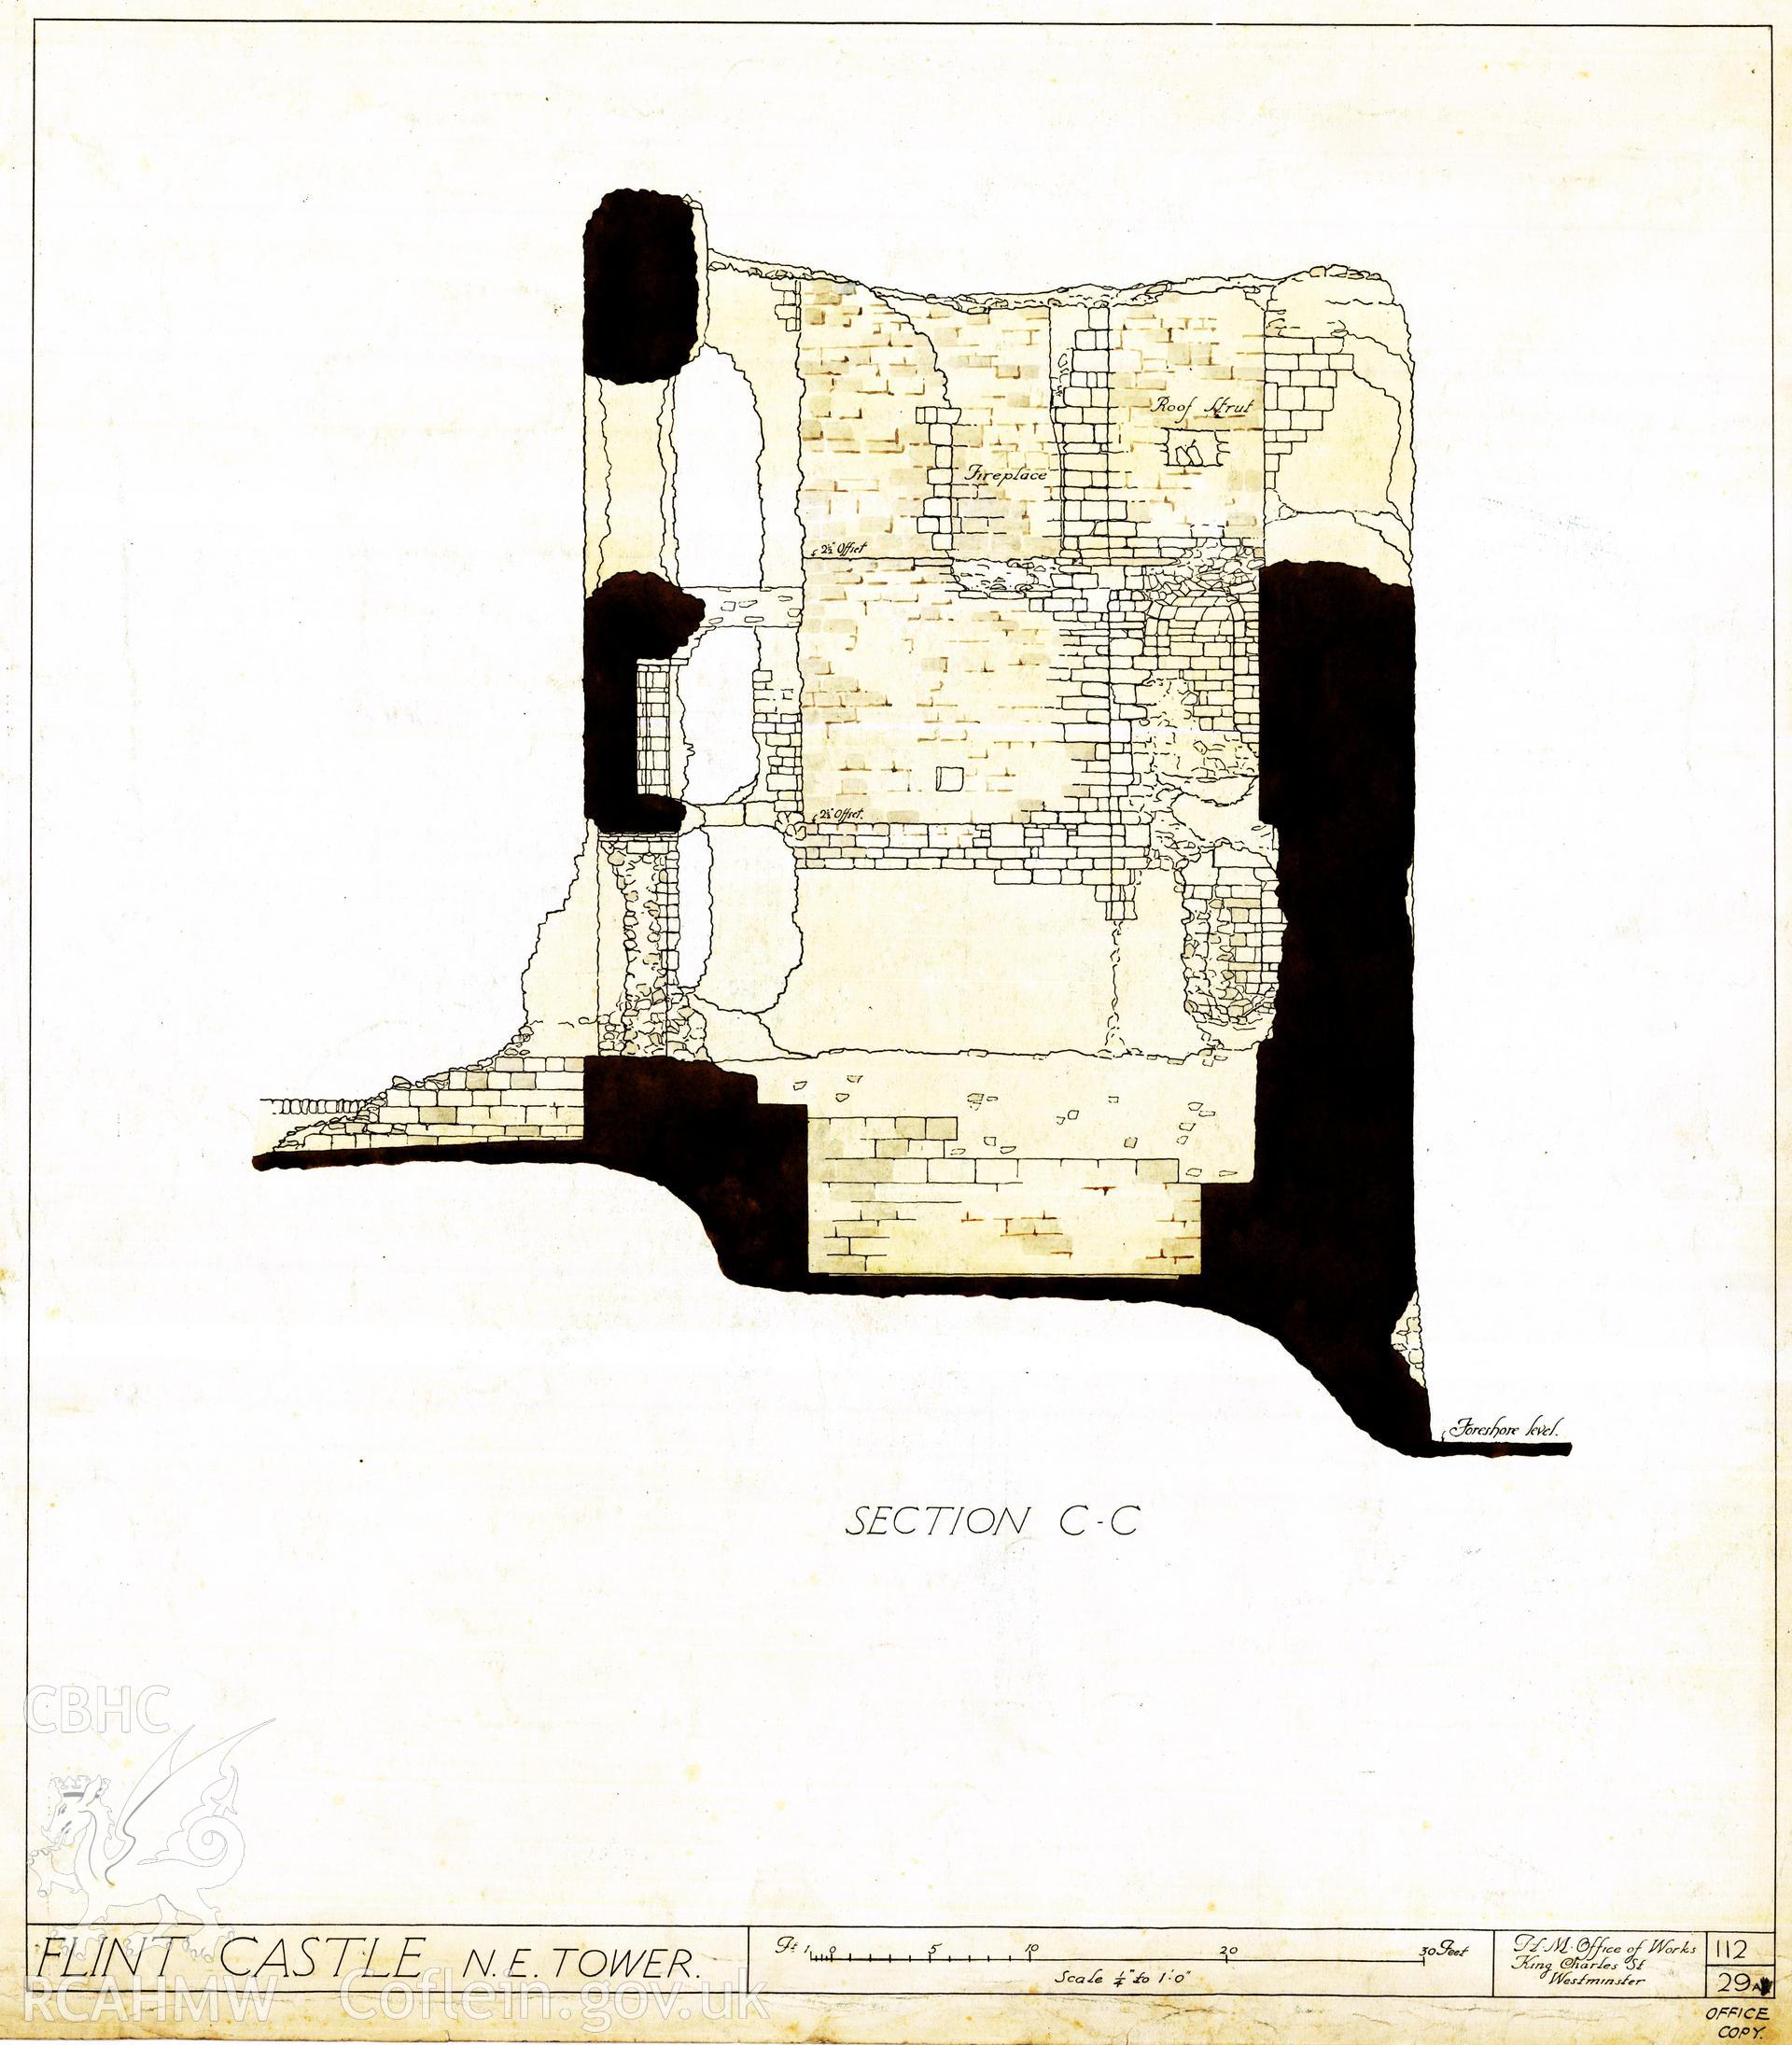 Cadw guardianship monument drawing of Flint Castle. NE tower, section CC (tinted). Cadw Ref. No. 112/29A. Scale 1:48.